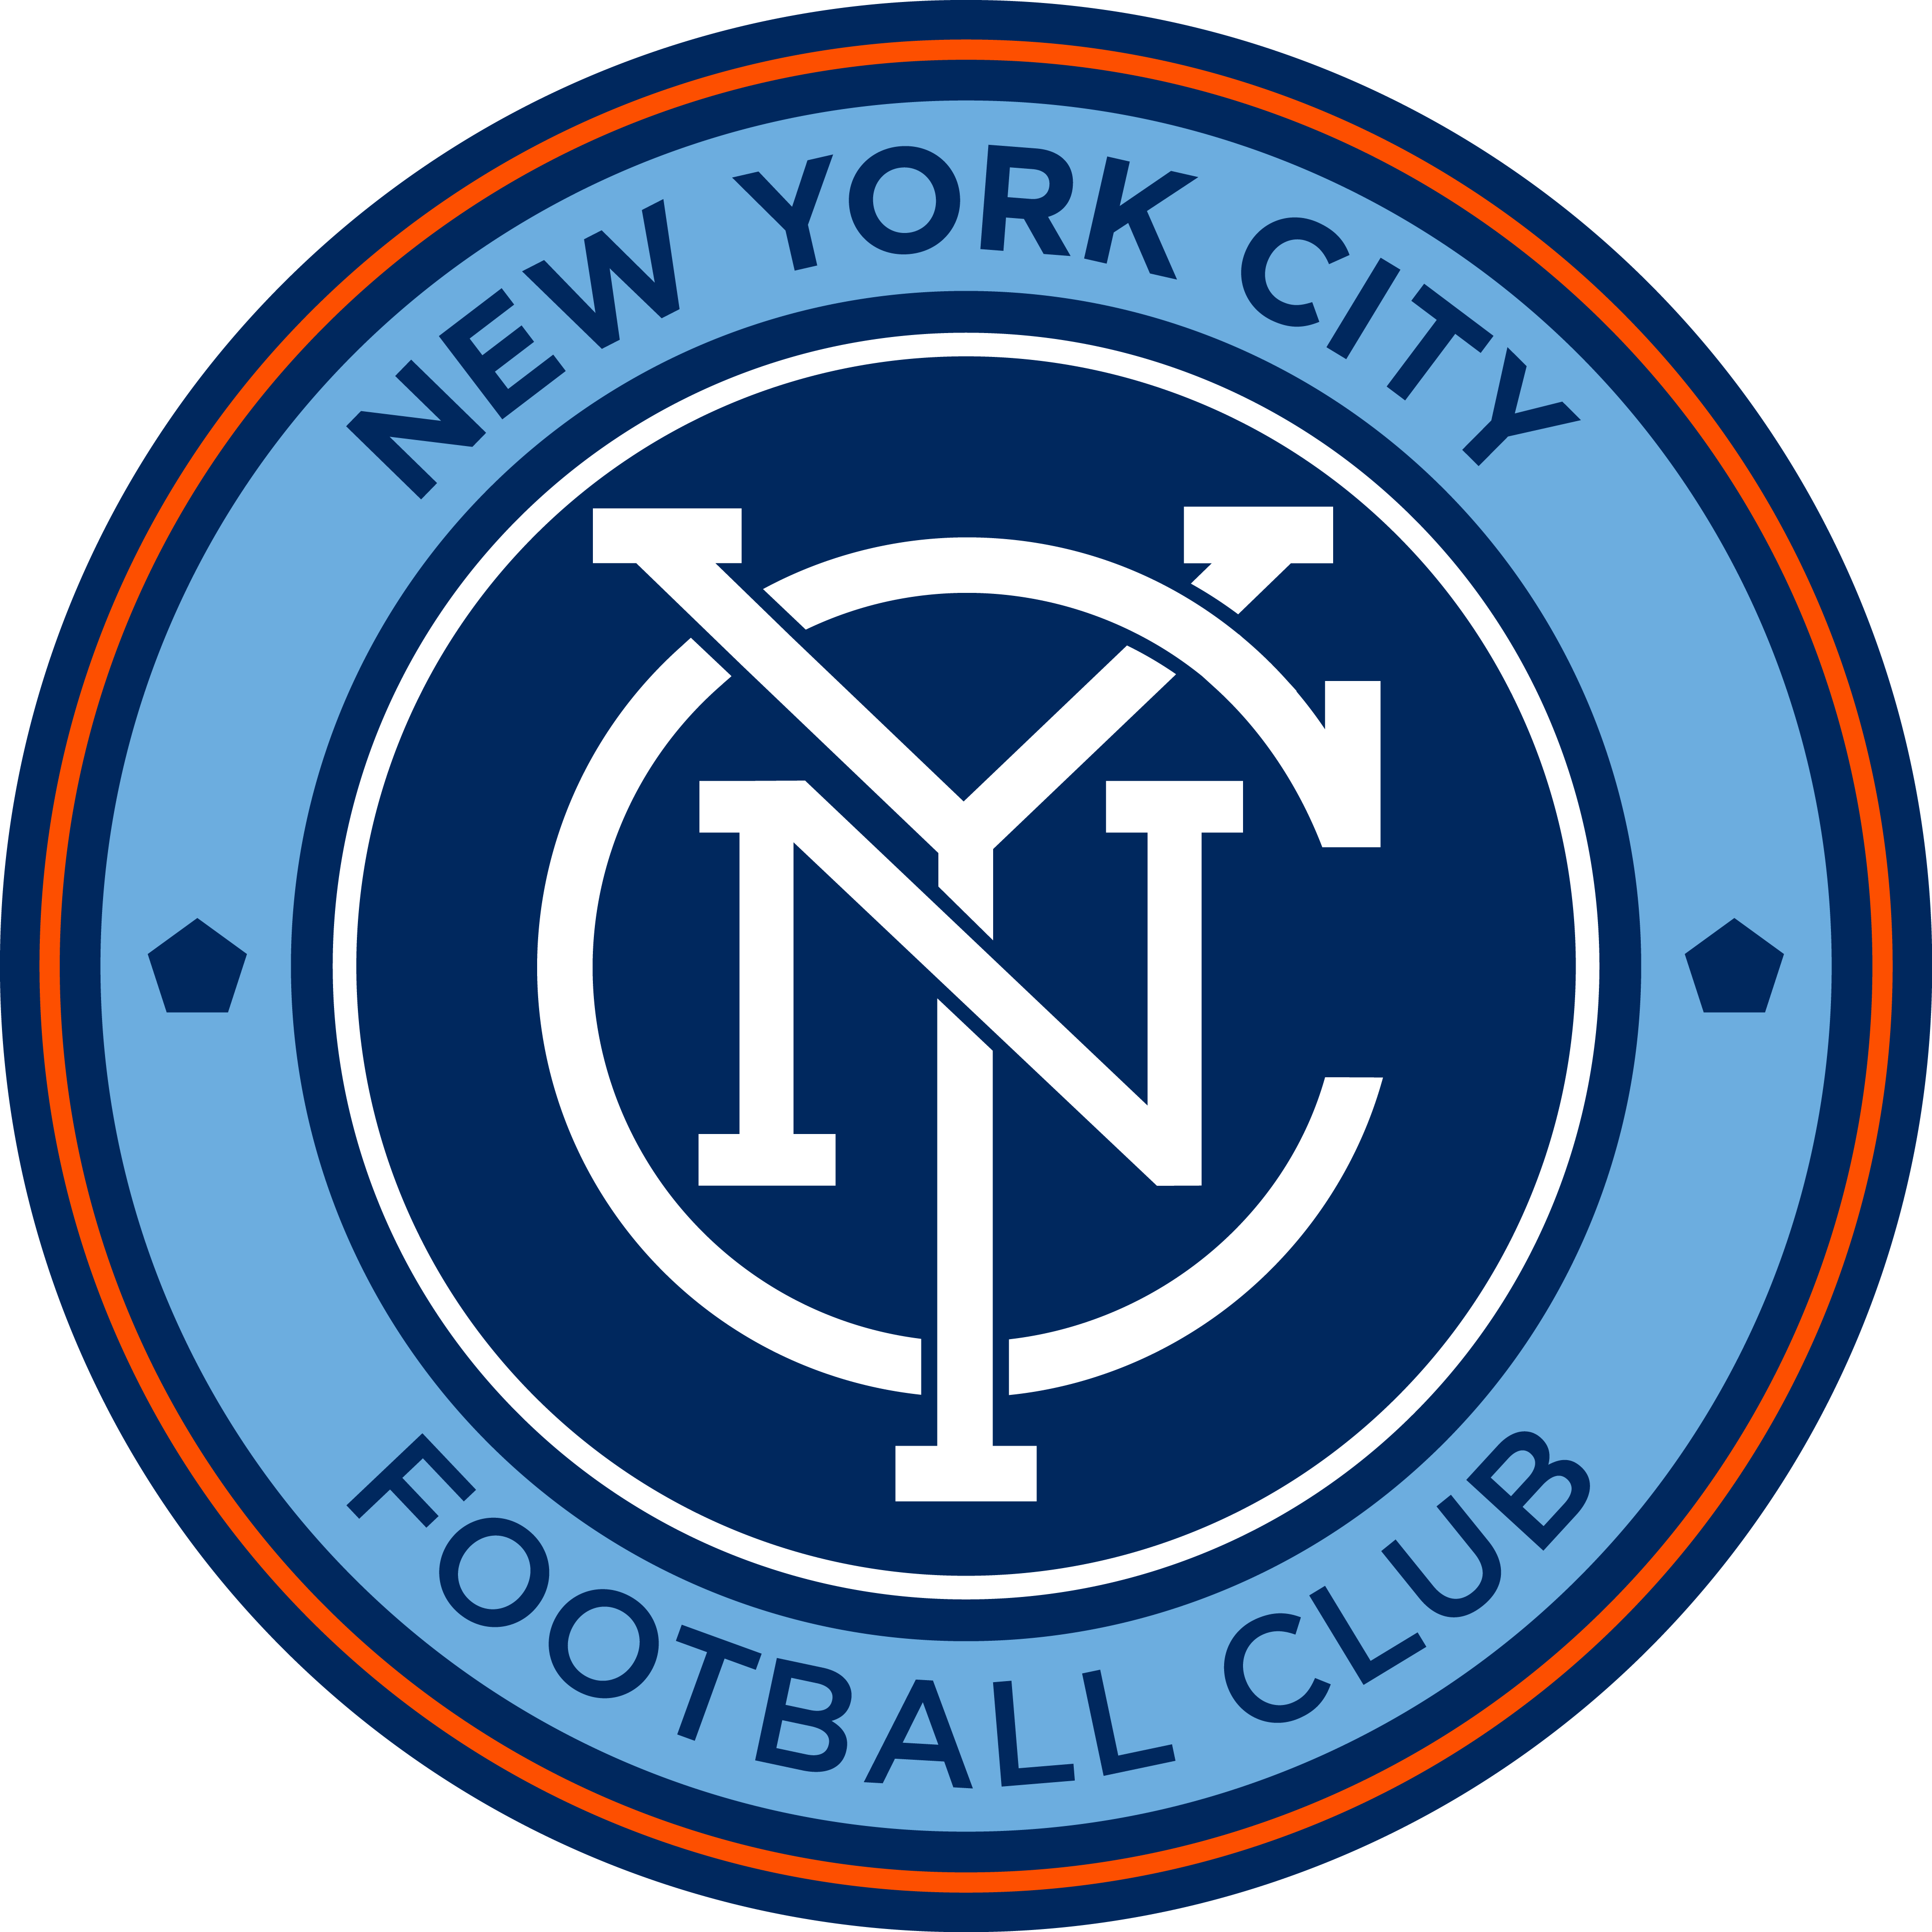 Blue Circle Soccer Logo - It Might Finally Be Time for Soccer to Win Over New York City ...